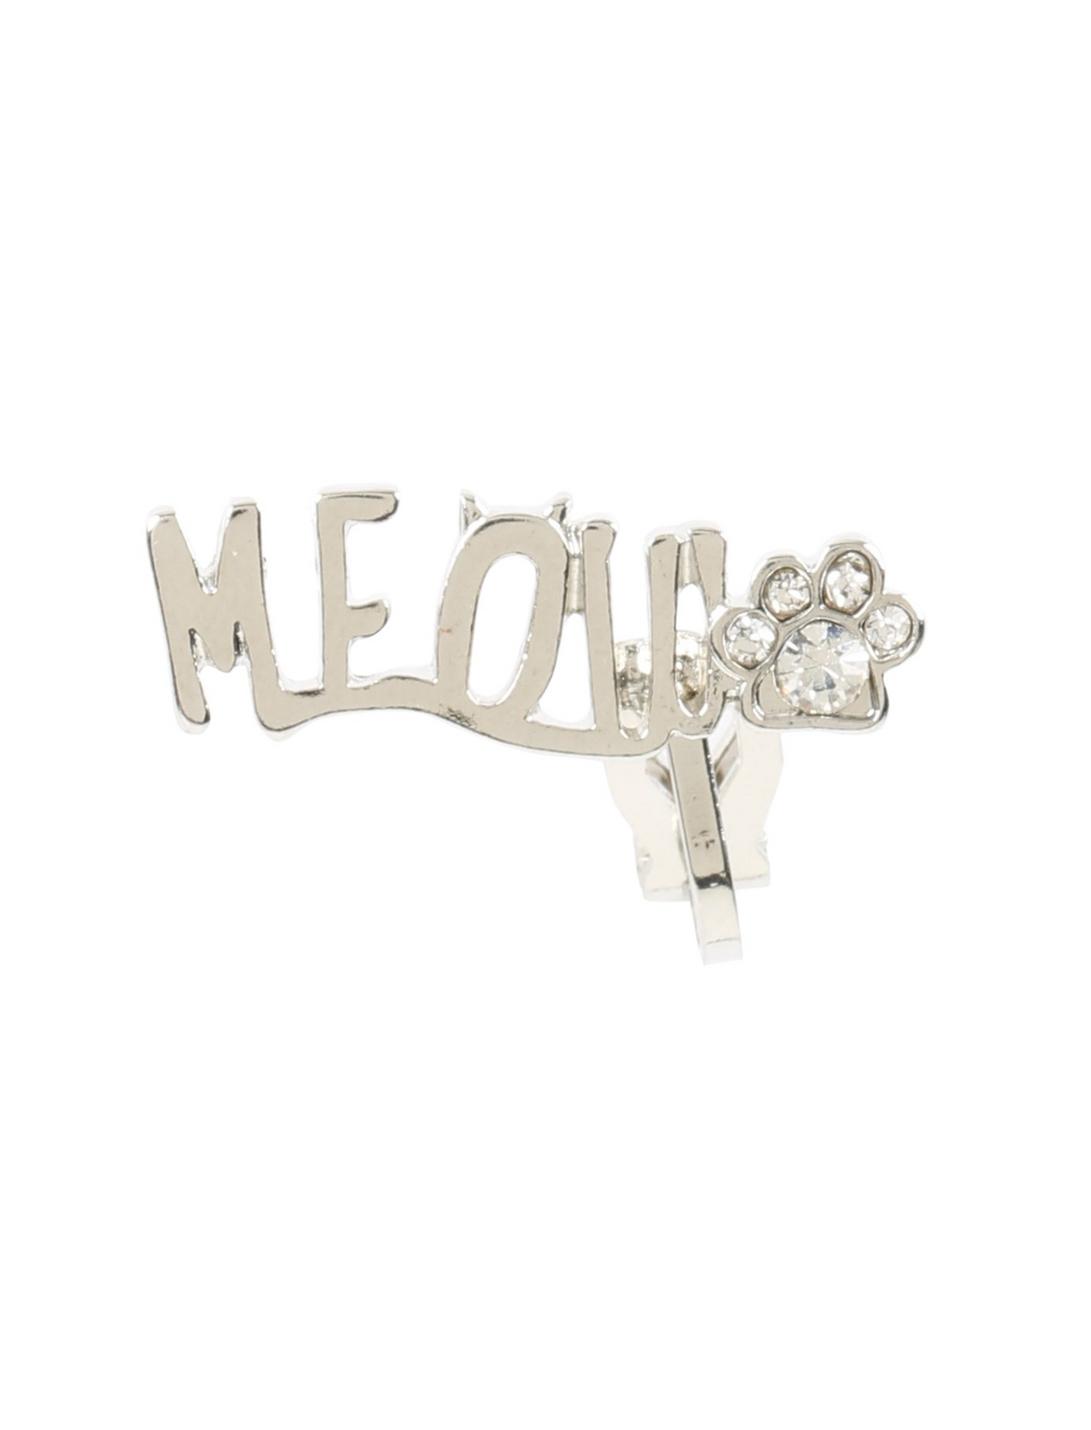 Blackheart Silver Meow Bling Cuff Stud Earring, , hi-res